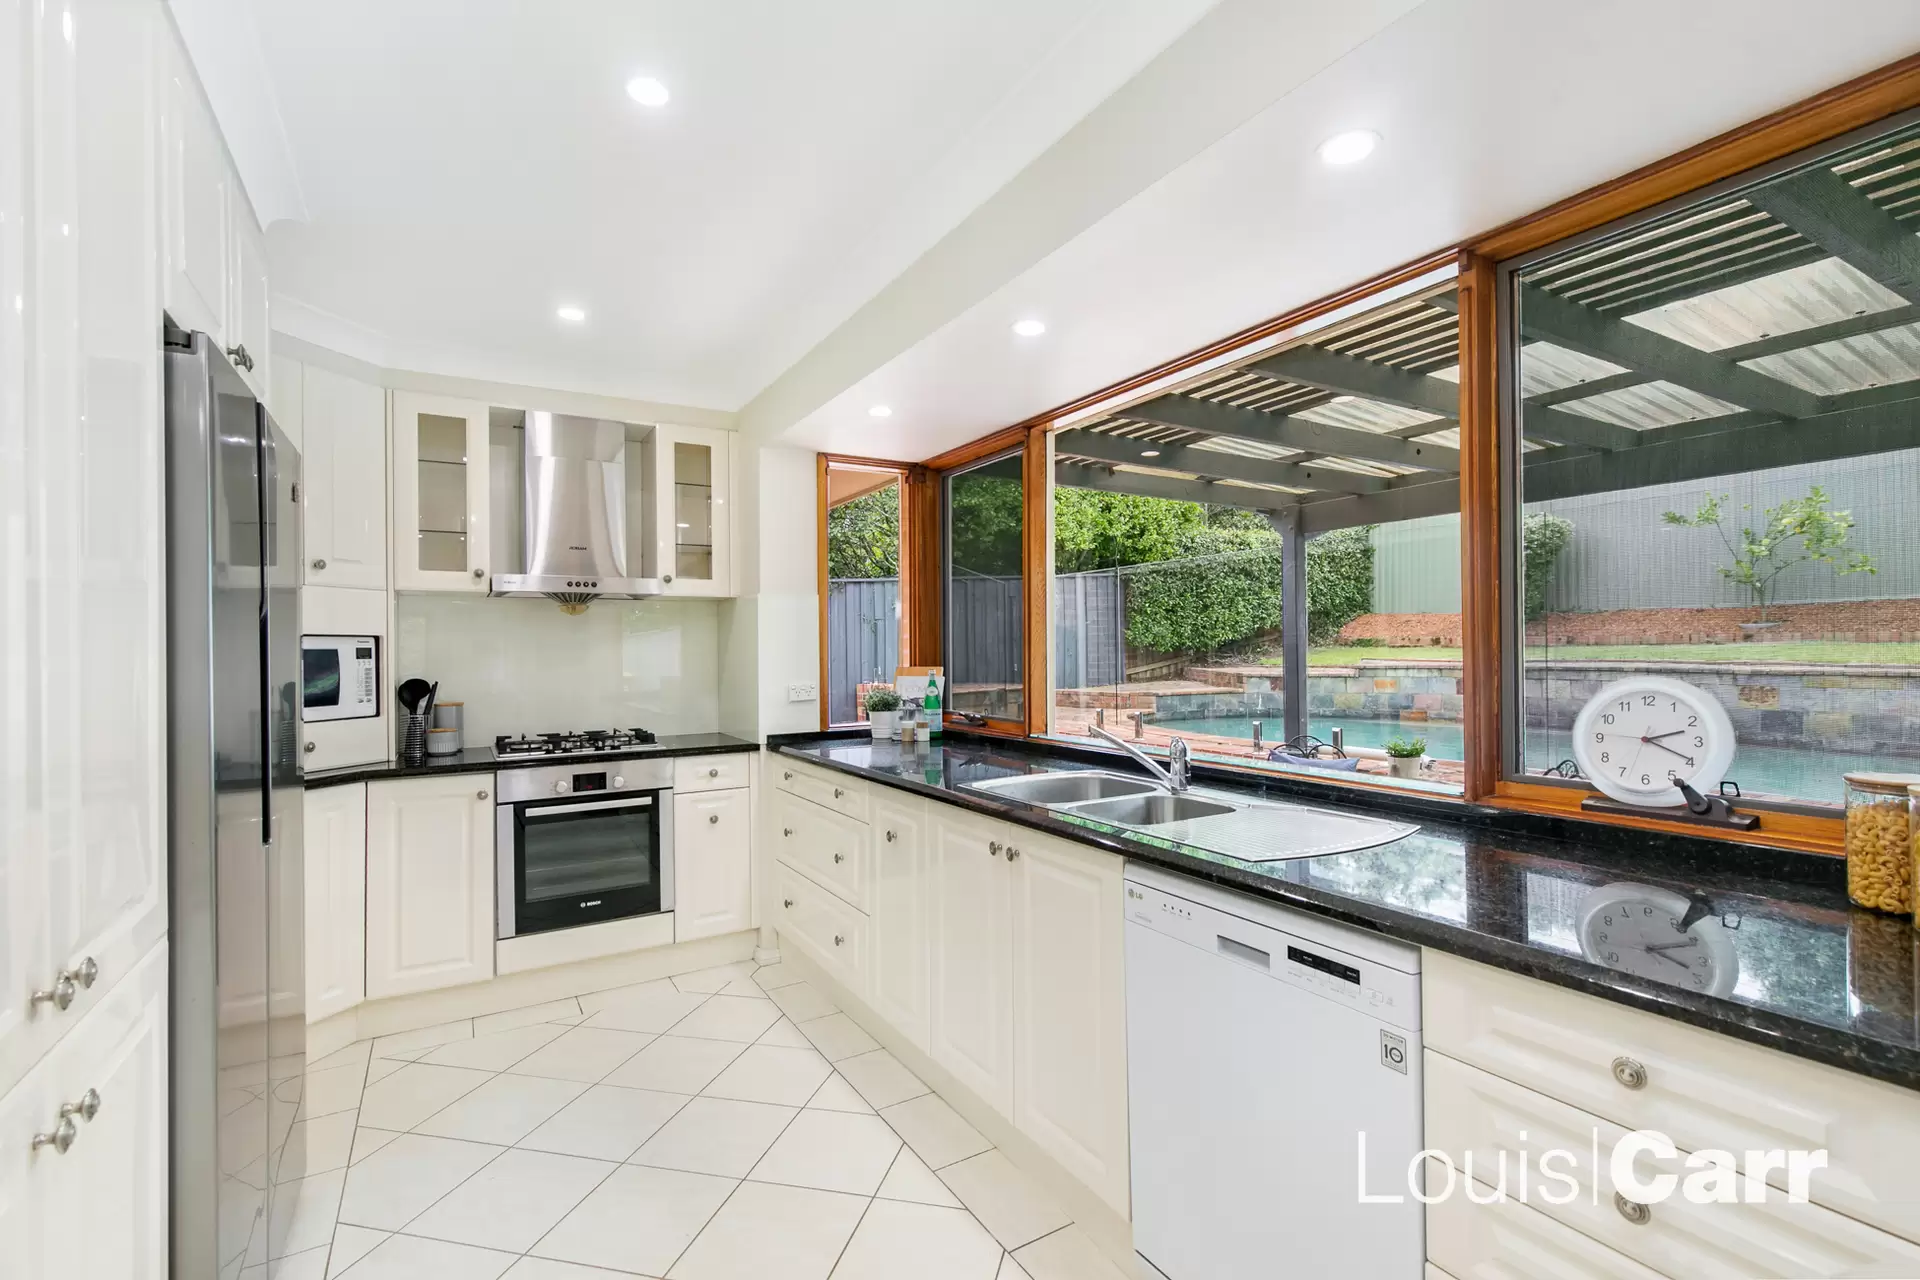 Photo #5: 165 Shepherds Drive, Cherrybrook - Auction by Louis Carr Real Estate